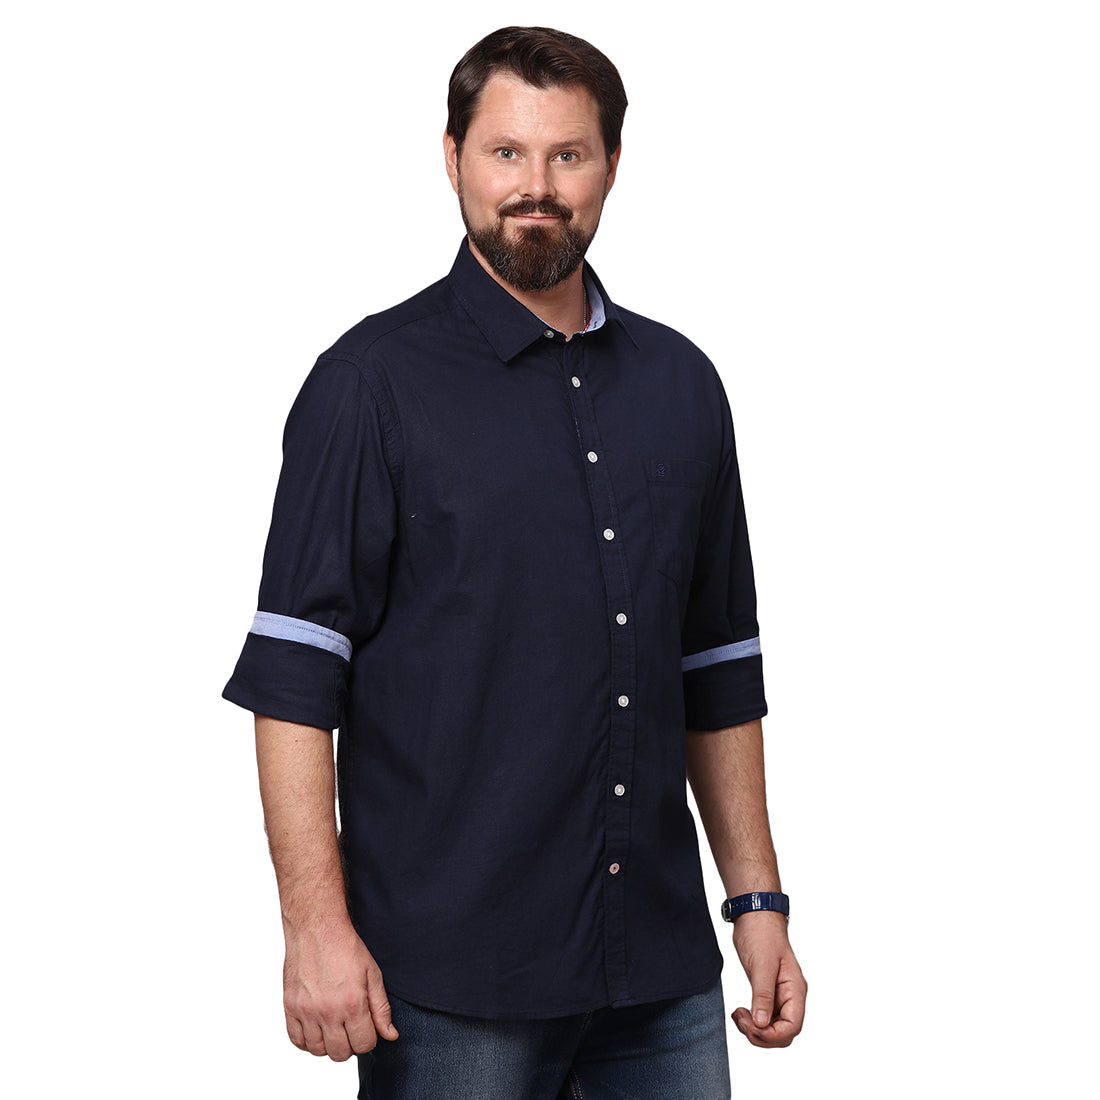 Big & Bold Solid Navy Blue Full Sleeves Slim Fit Casual Shirts (Plus Size) - Double Two